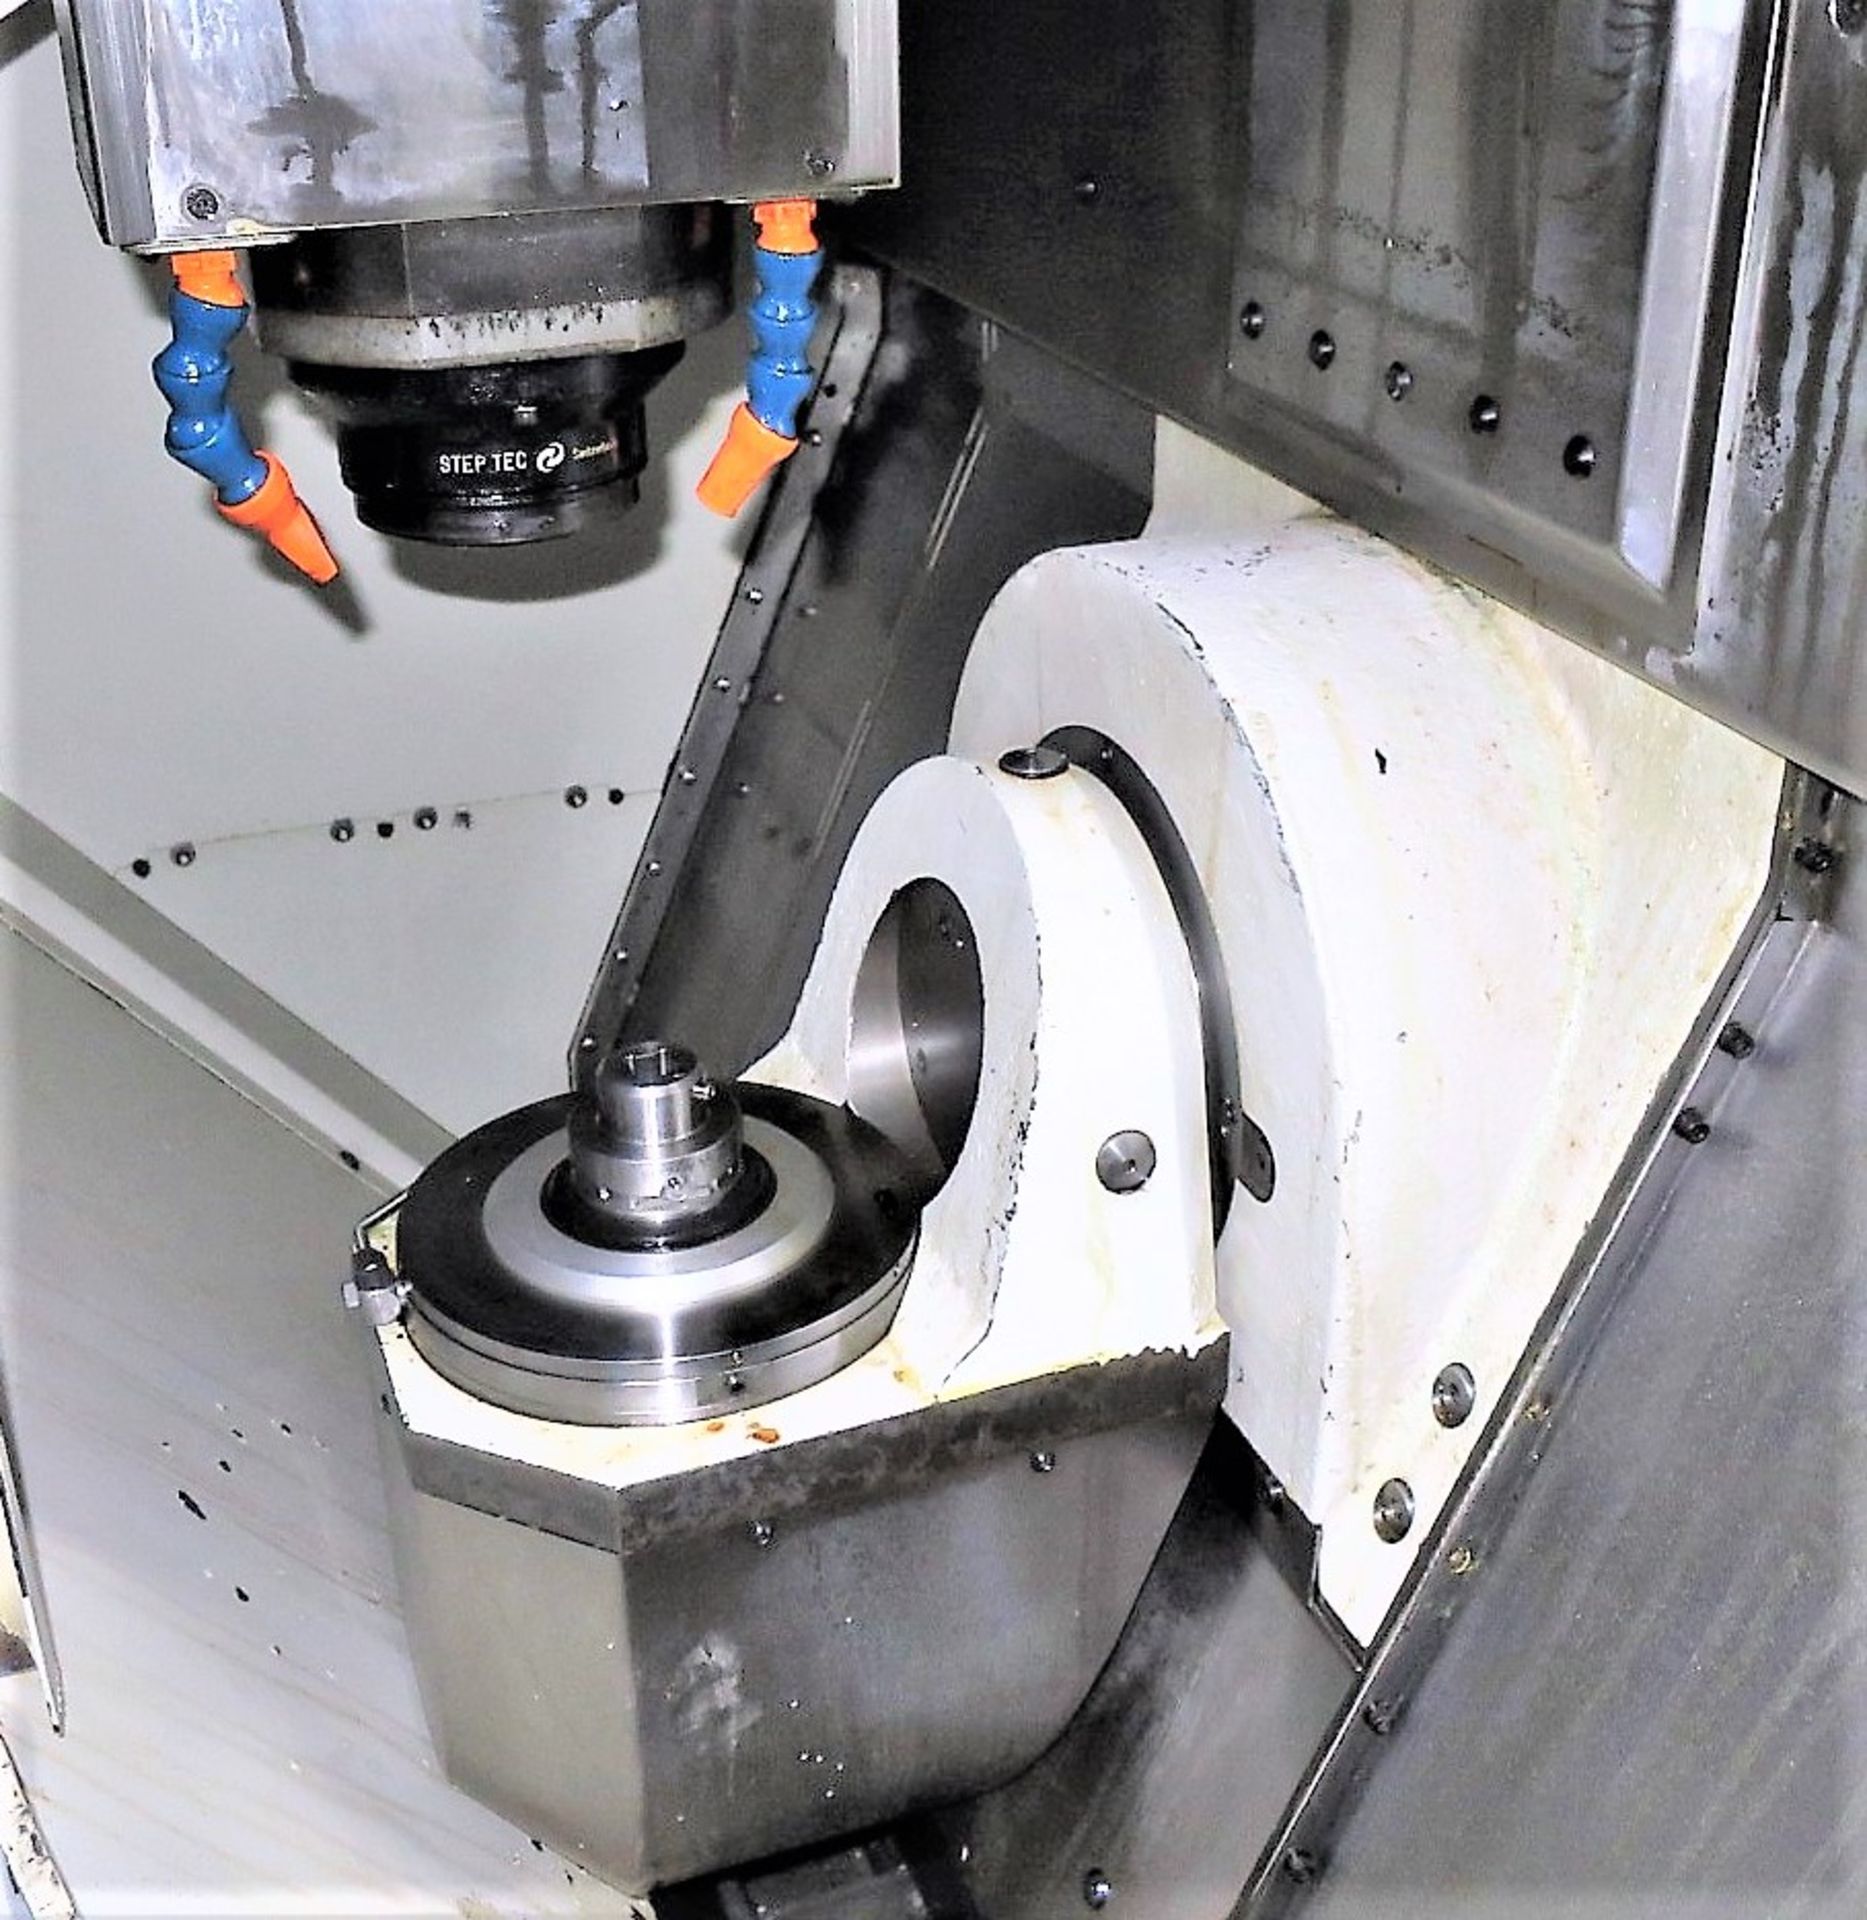 Mikron HSM-400U High Speed 5-Axis CNC Vertical Machining Center, S/N 107.87.00.108 (42,000 RPM) - Image 3 of 8